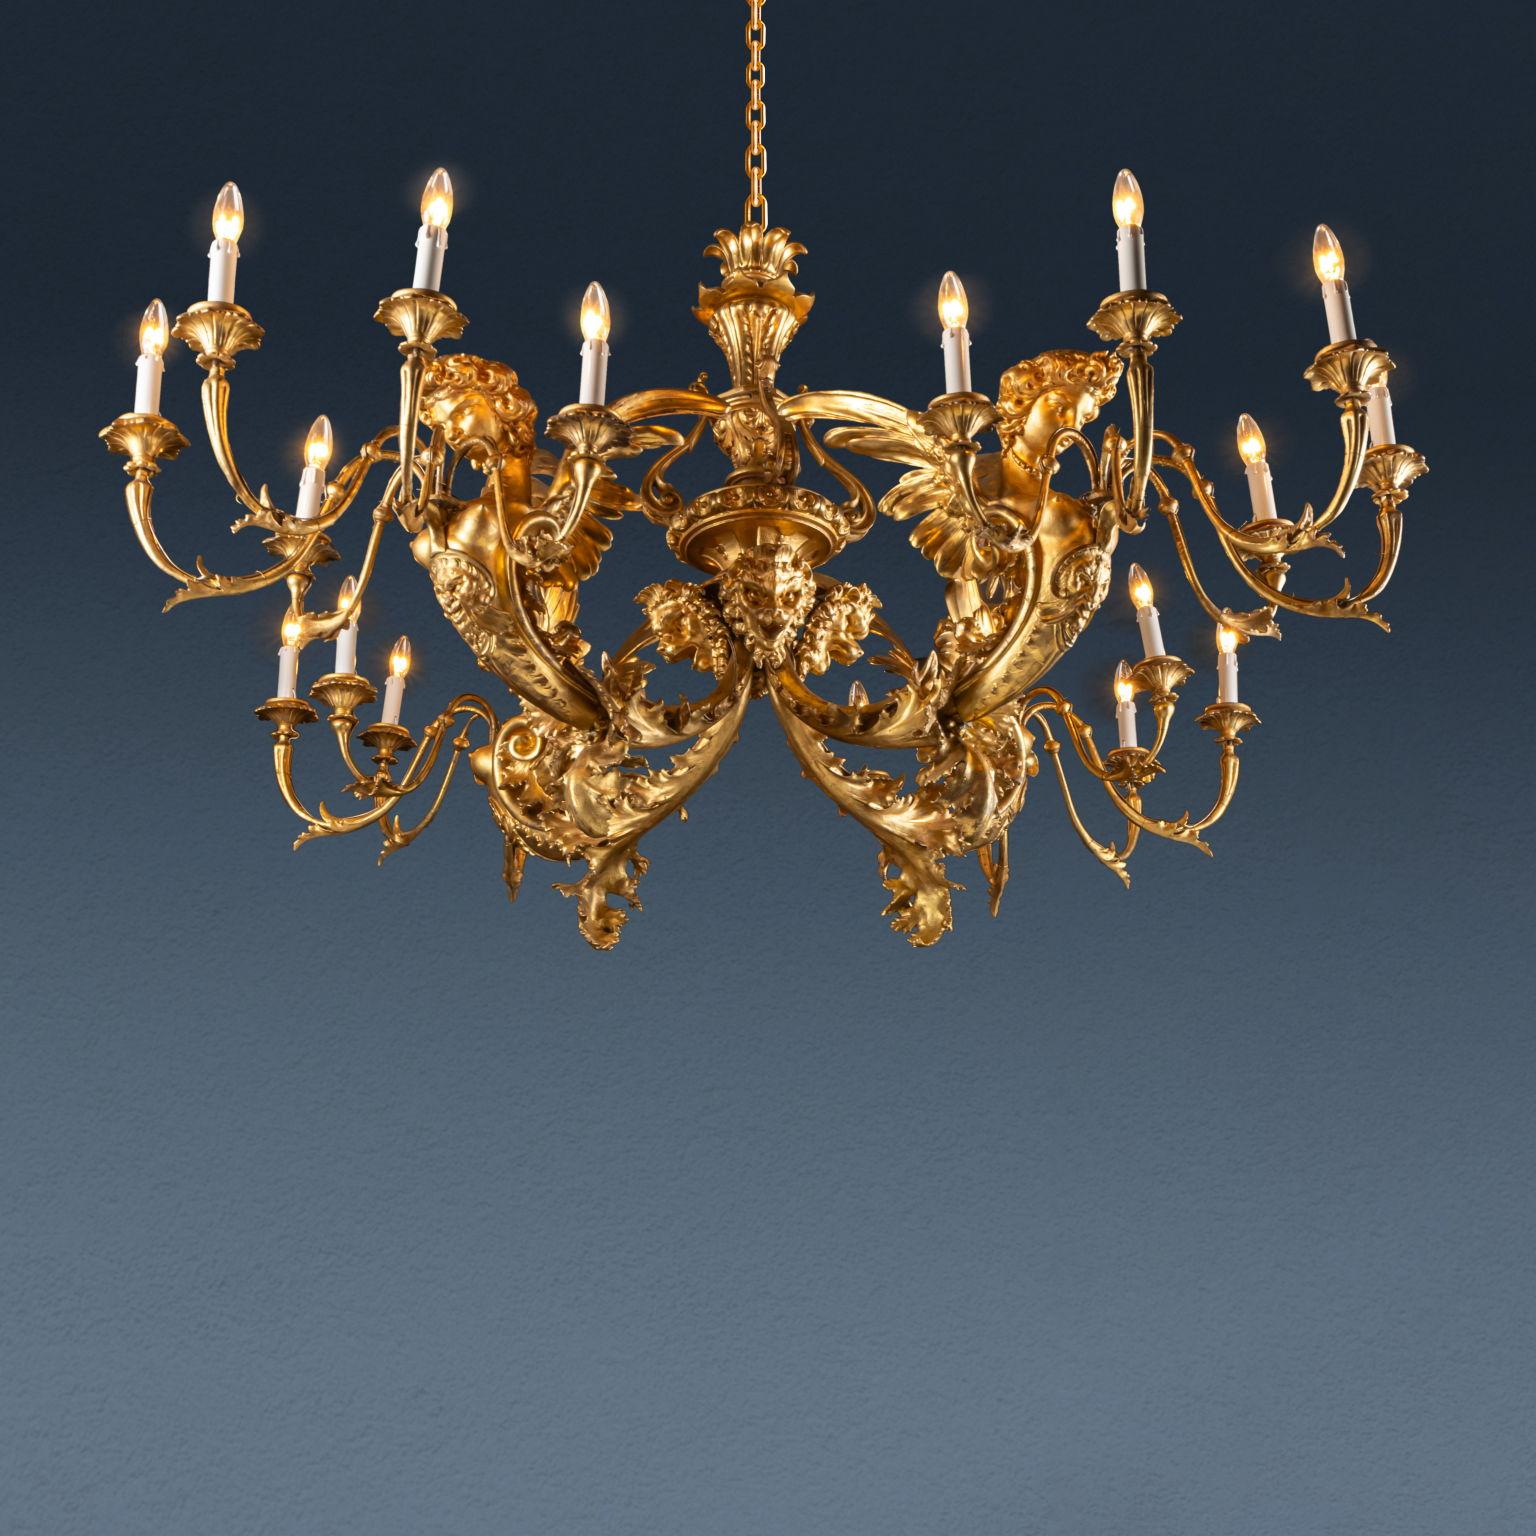 Carved and gilded metal and wood chandelier. The central body, carved with floral and leaf motifs, is ornamented at the bottom with four lion heads, alternating with as many arms carved with curling leaf volutes and ending with busts of winged